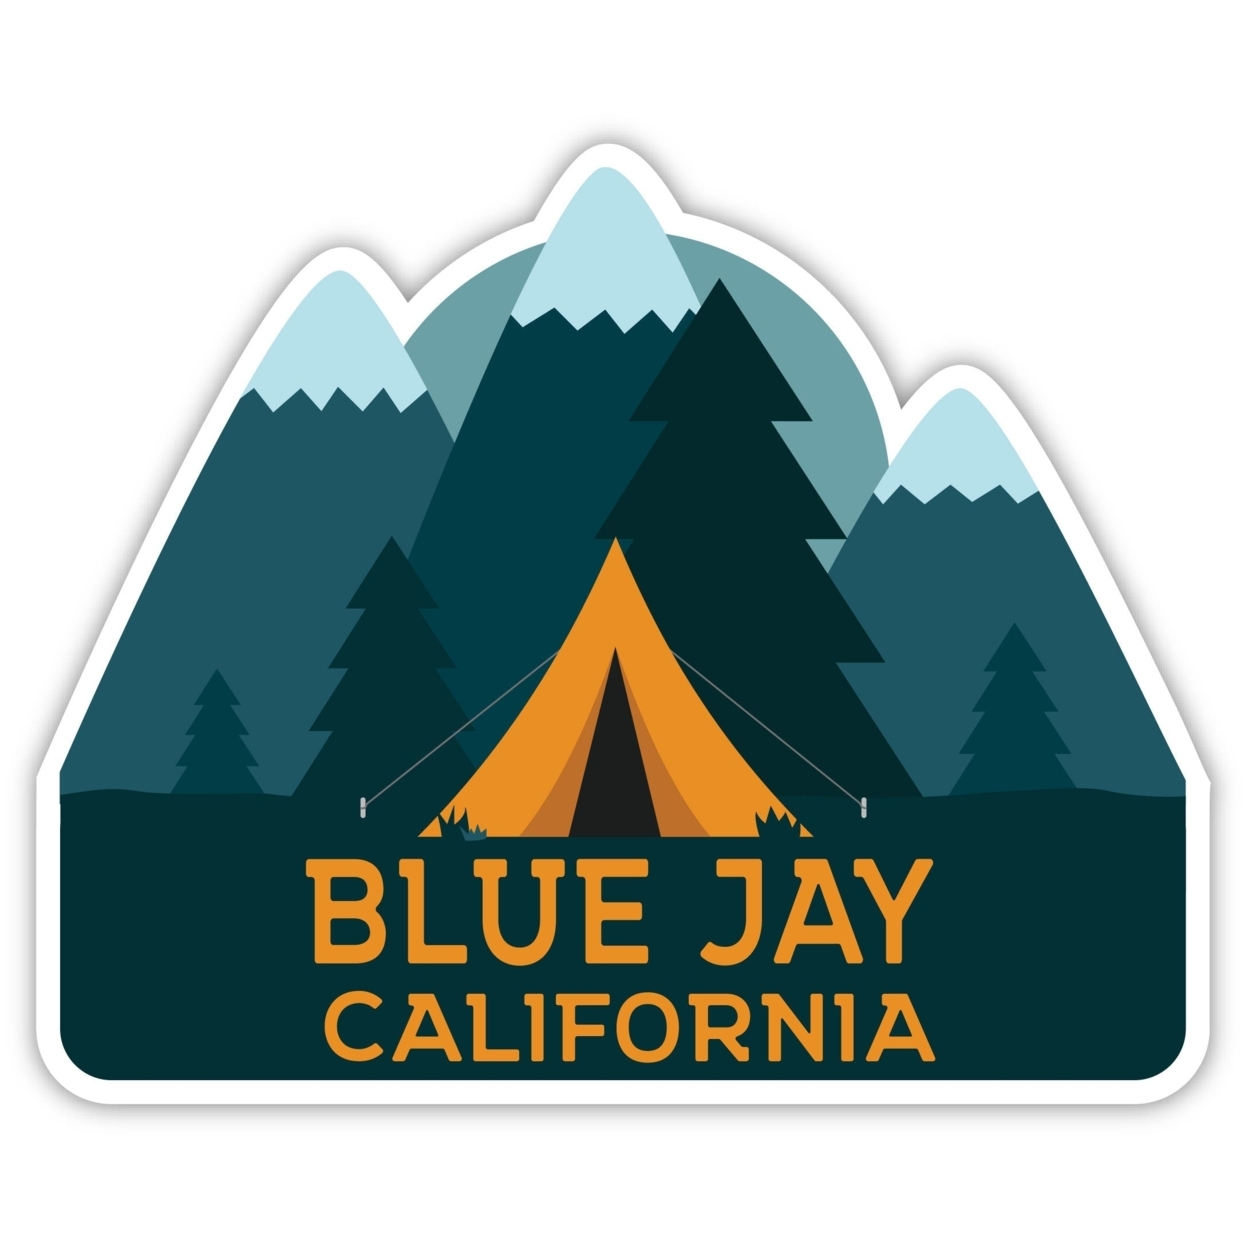 Blue Jay California Souvenir Decorative Stickers (Choose Theme And Size) - 4-Pack, 4-Inch, Tent